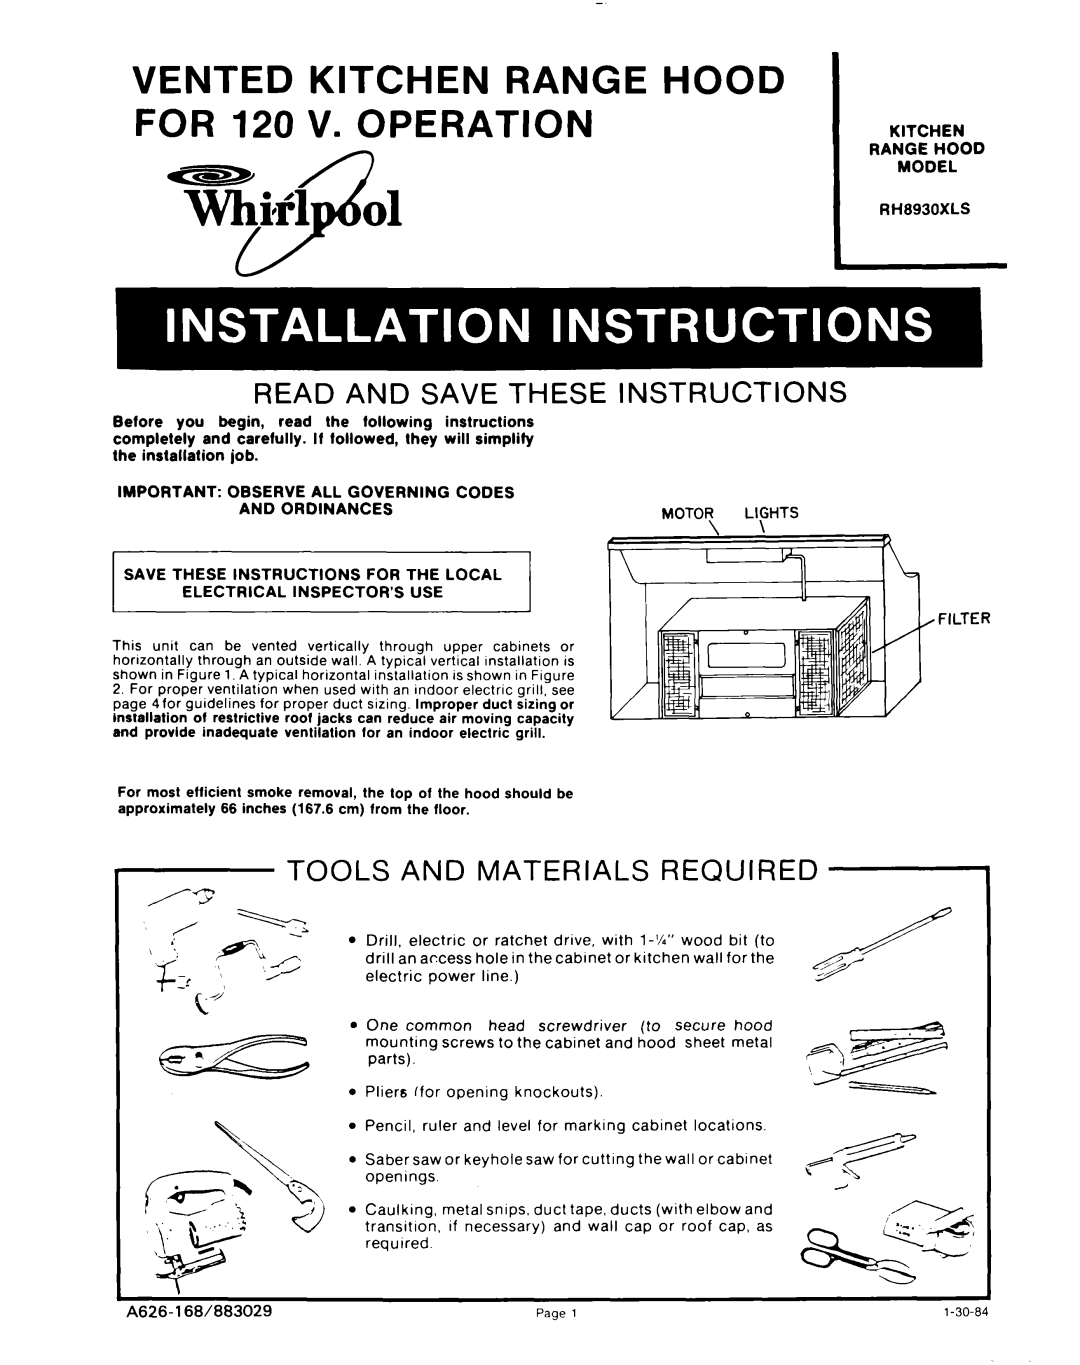 Whirlpool RH8930XLS manual Required, VENTED KITCHEN RANGE HOOD FOR 120 V. OPERATION, Read And Save These, Instructions 